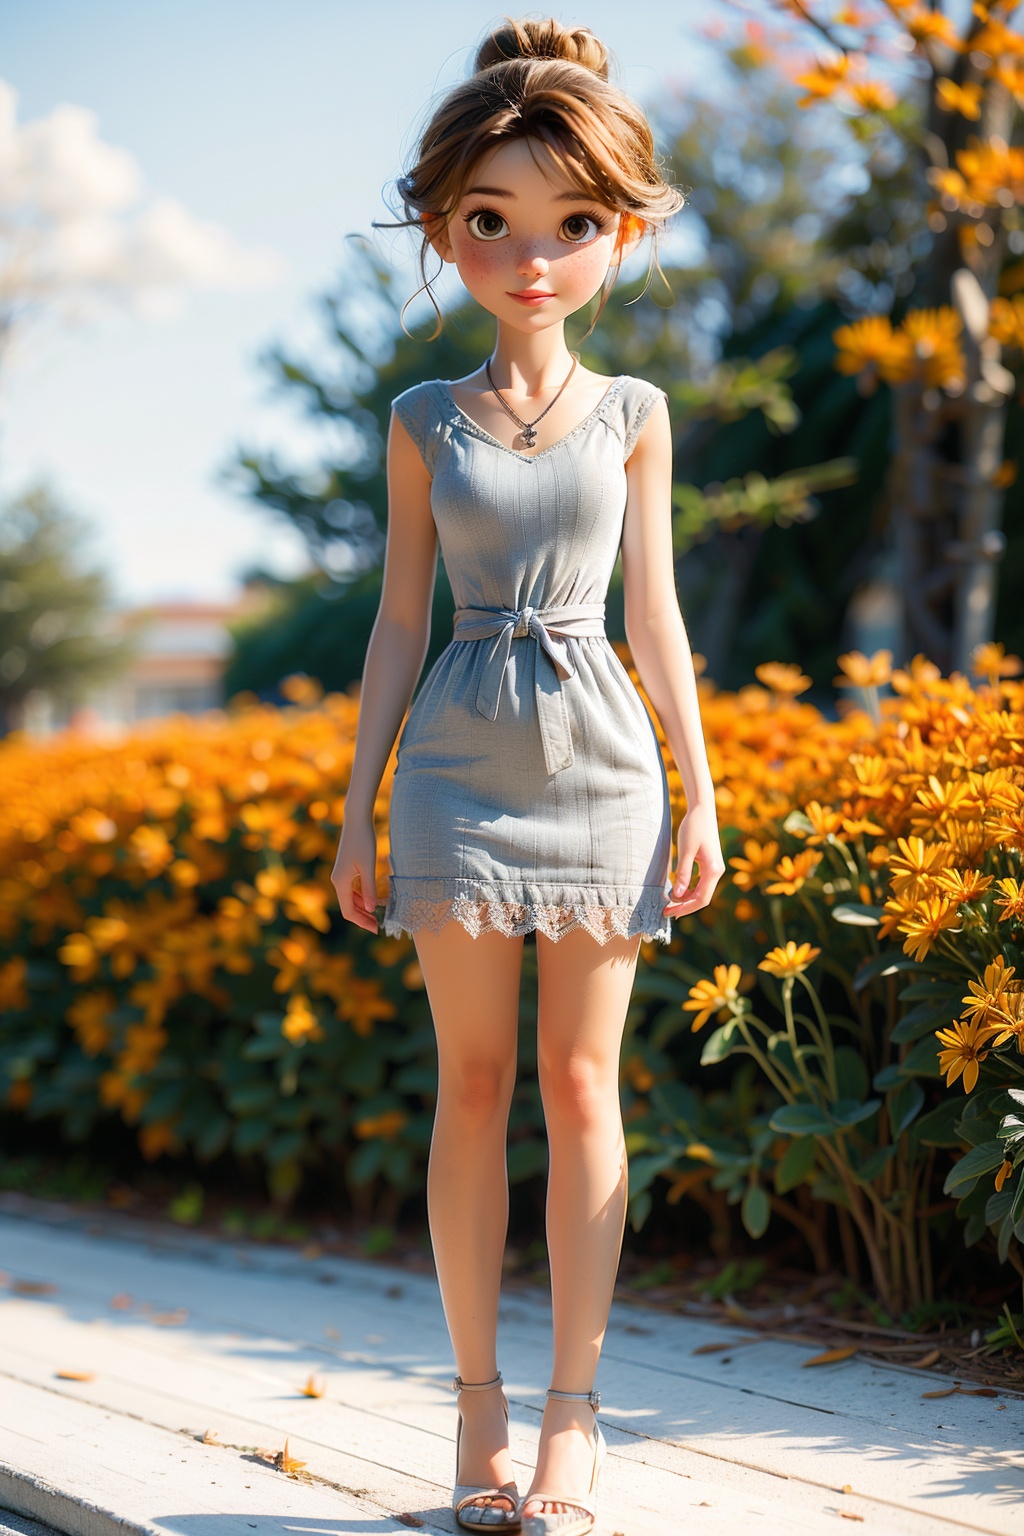 <lora:4:1>,Realistic,masterpiece,highest quality,high resolution,extreme details,1 girl,solo,bun,headdress,delicate eyes,beautiful face,shallow smile,delicate necklace,suspender dress,white lace dress,light gauze,snow-white skin,delicate skin texture,silver bracelet,pantyhose,high heels,elegant standing,outdoor,blue sky,white clouds,flowers,flowers,grass,movie light,light,light tracking,(Nikon AF-S 105mm f / 1.4E ED),